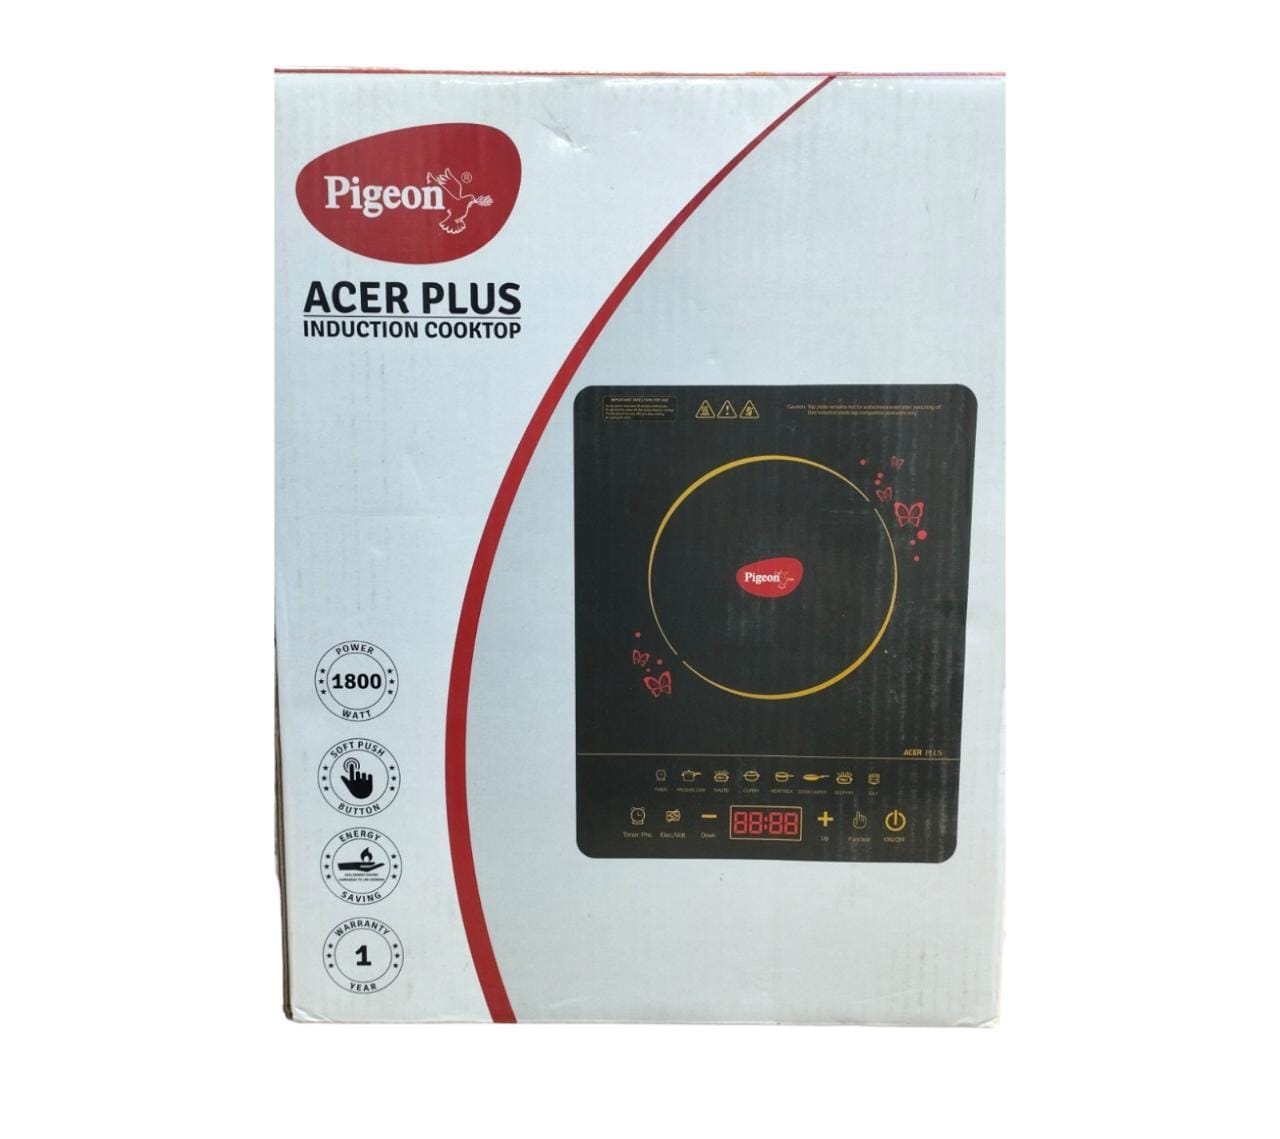 Pigeon  acer plus induction cooktop 